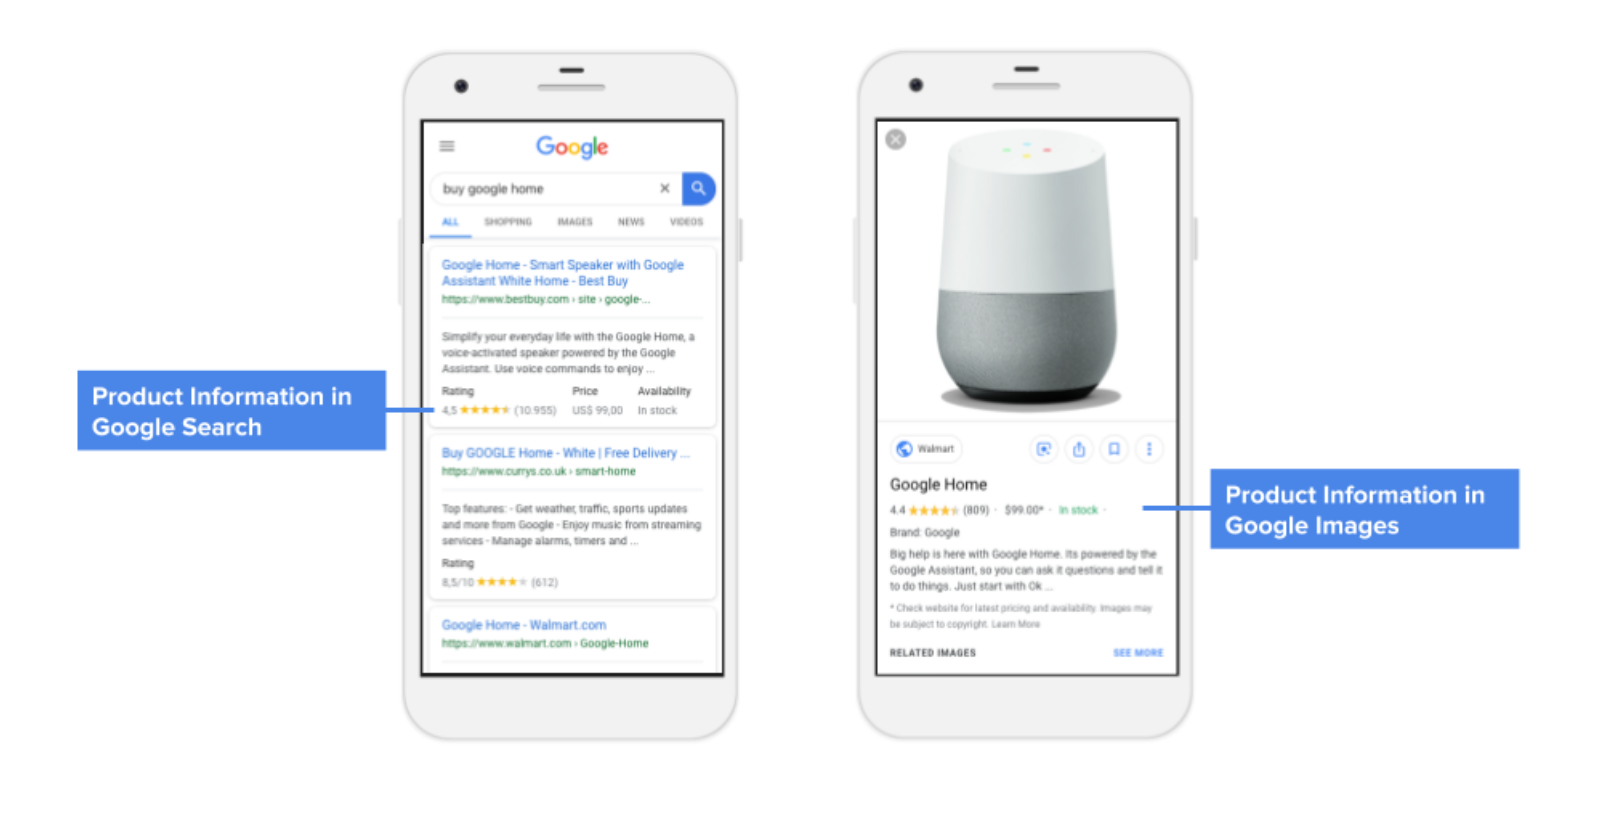 Product Information on Google Search